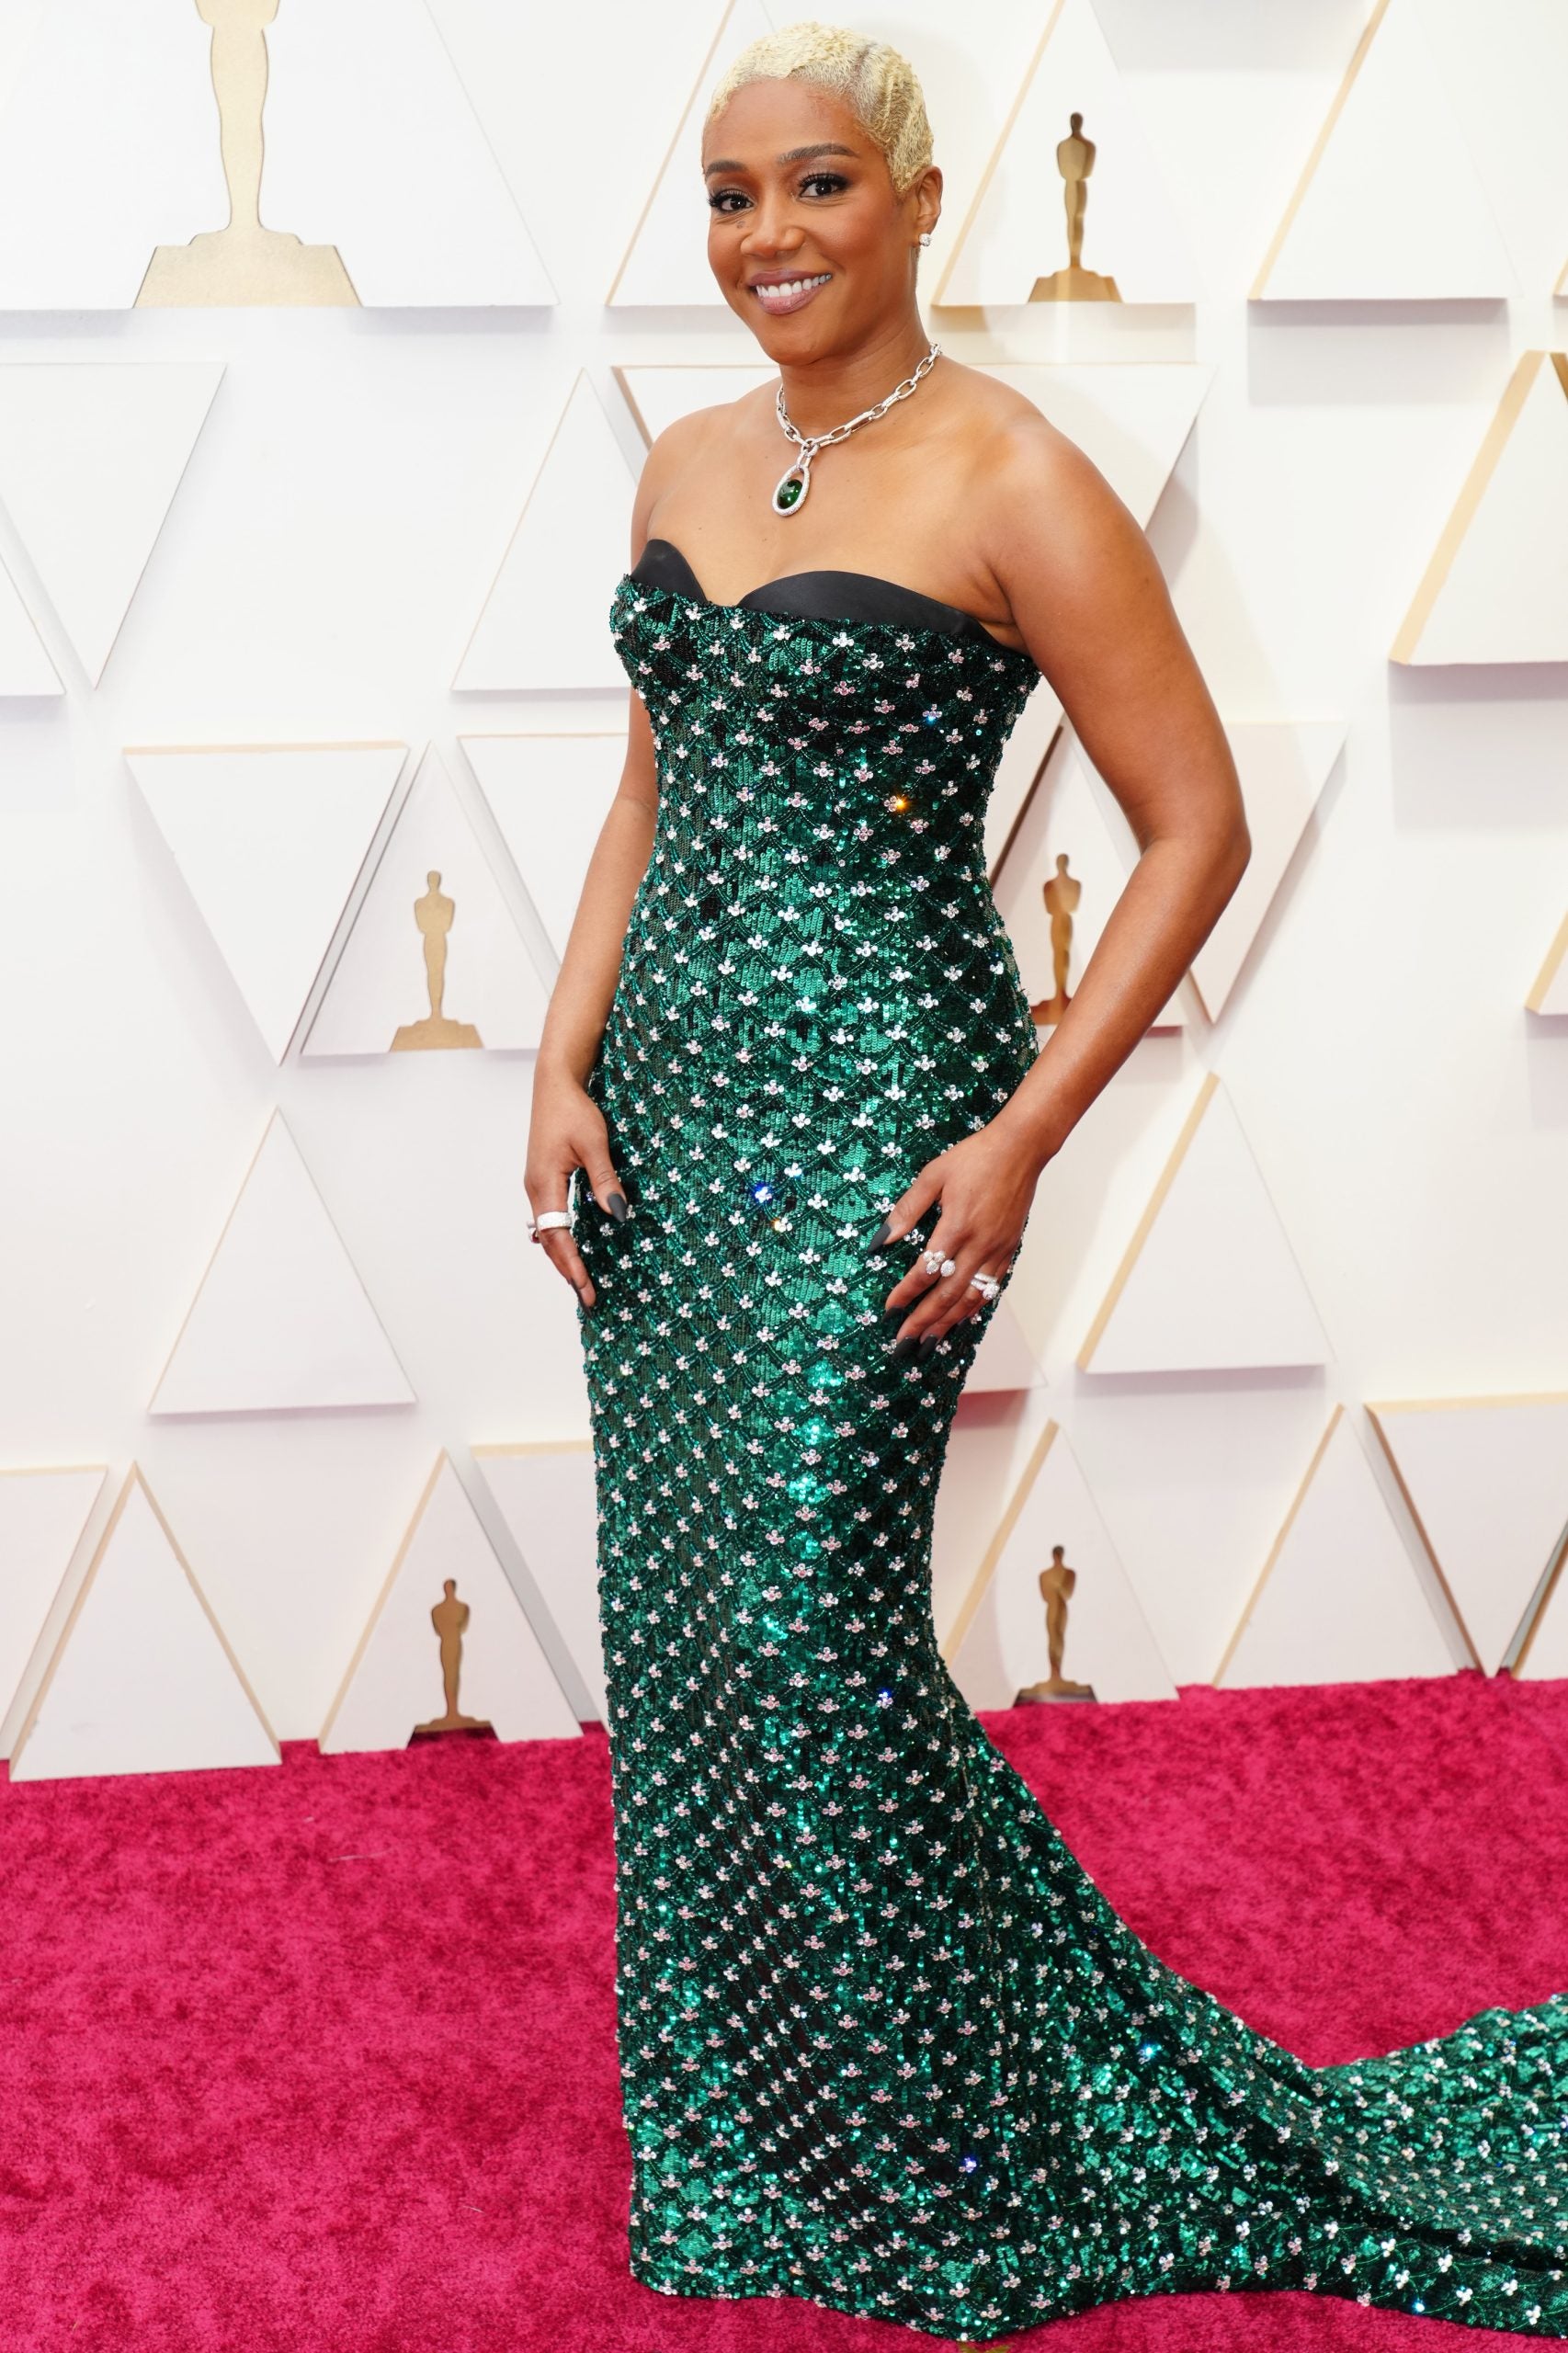 Black Hollywood Lit Up The Red Carpet At The 2022 Academy Awards